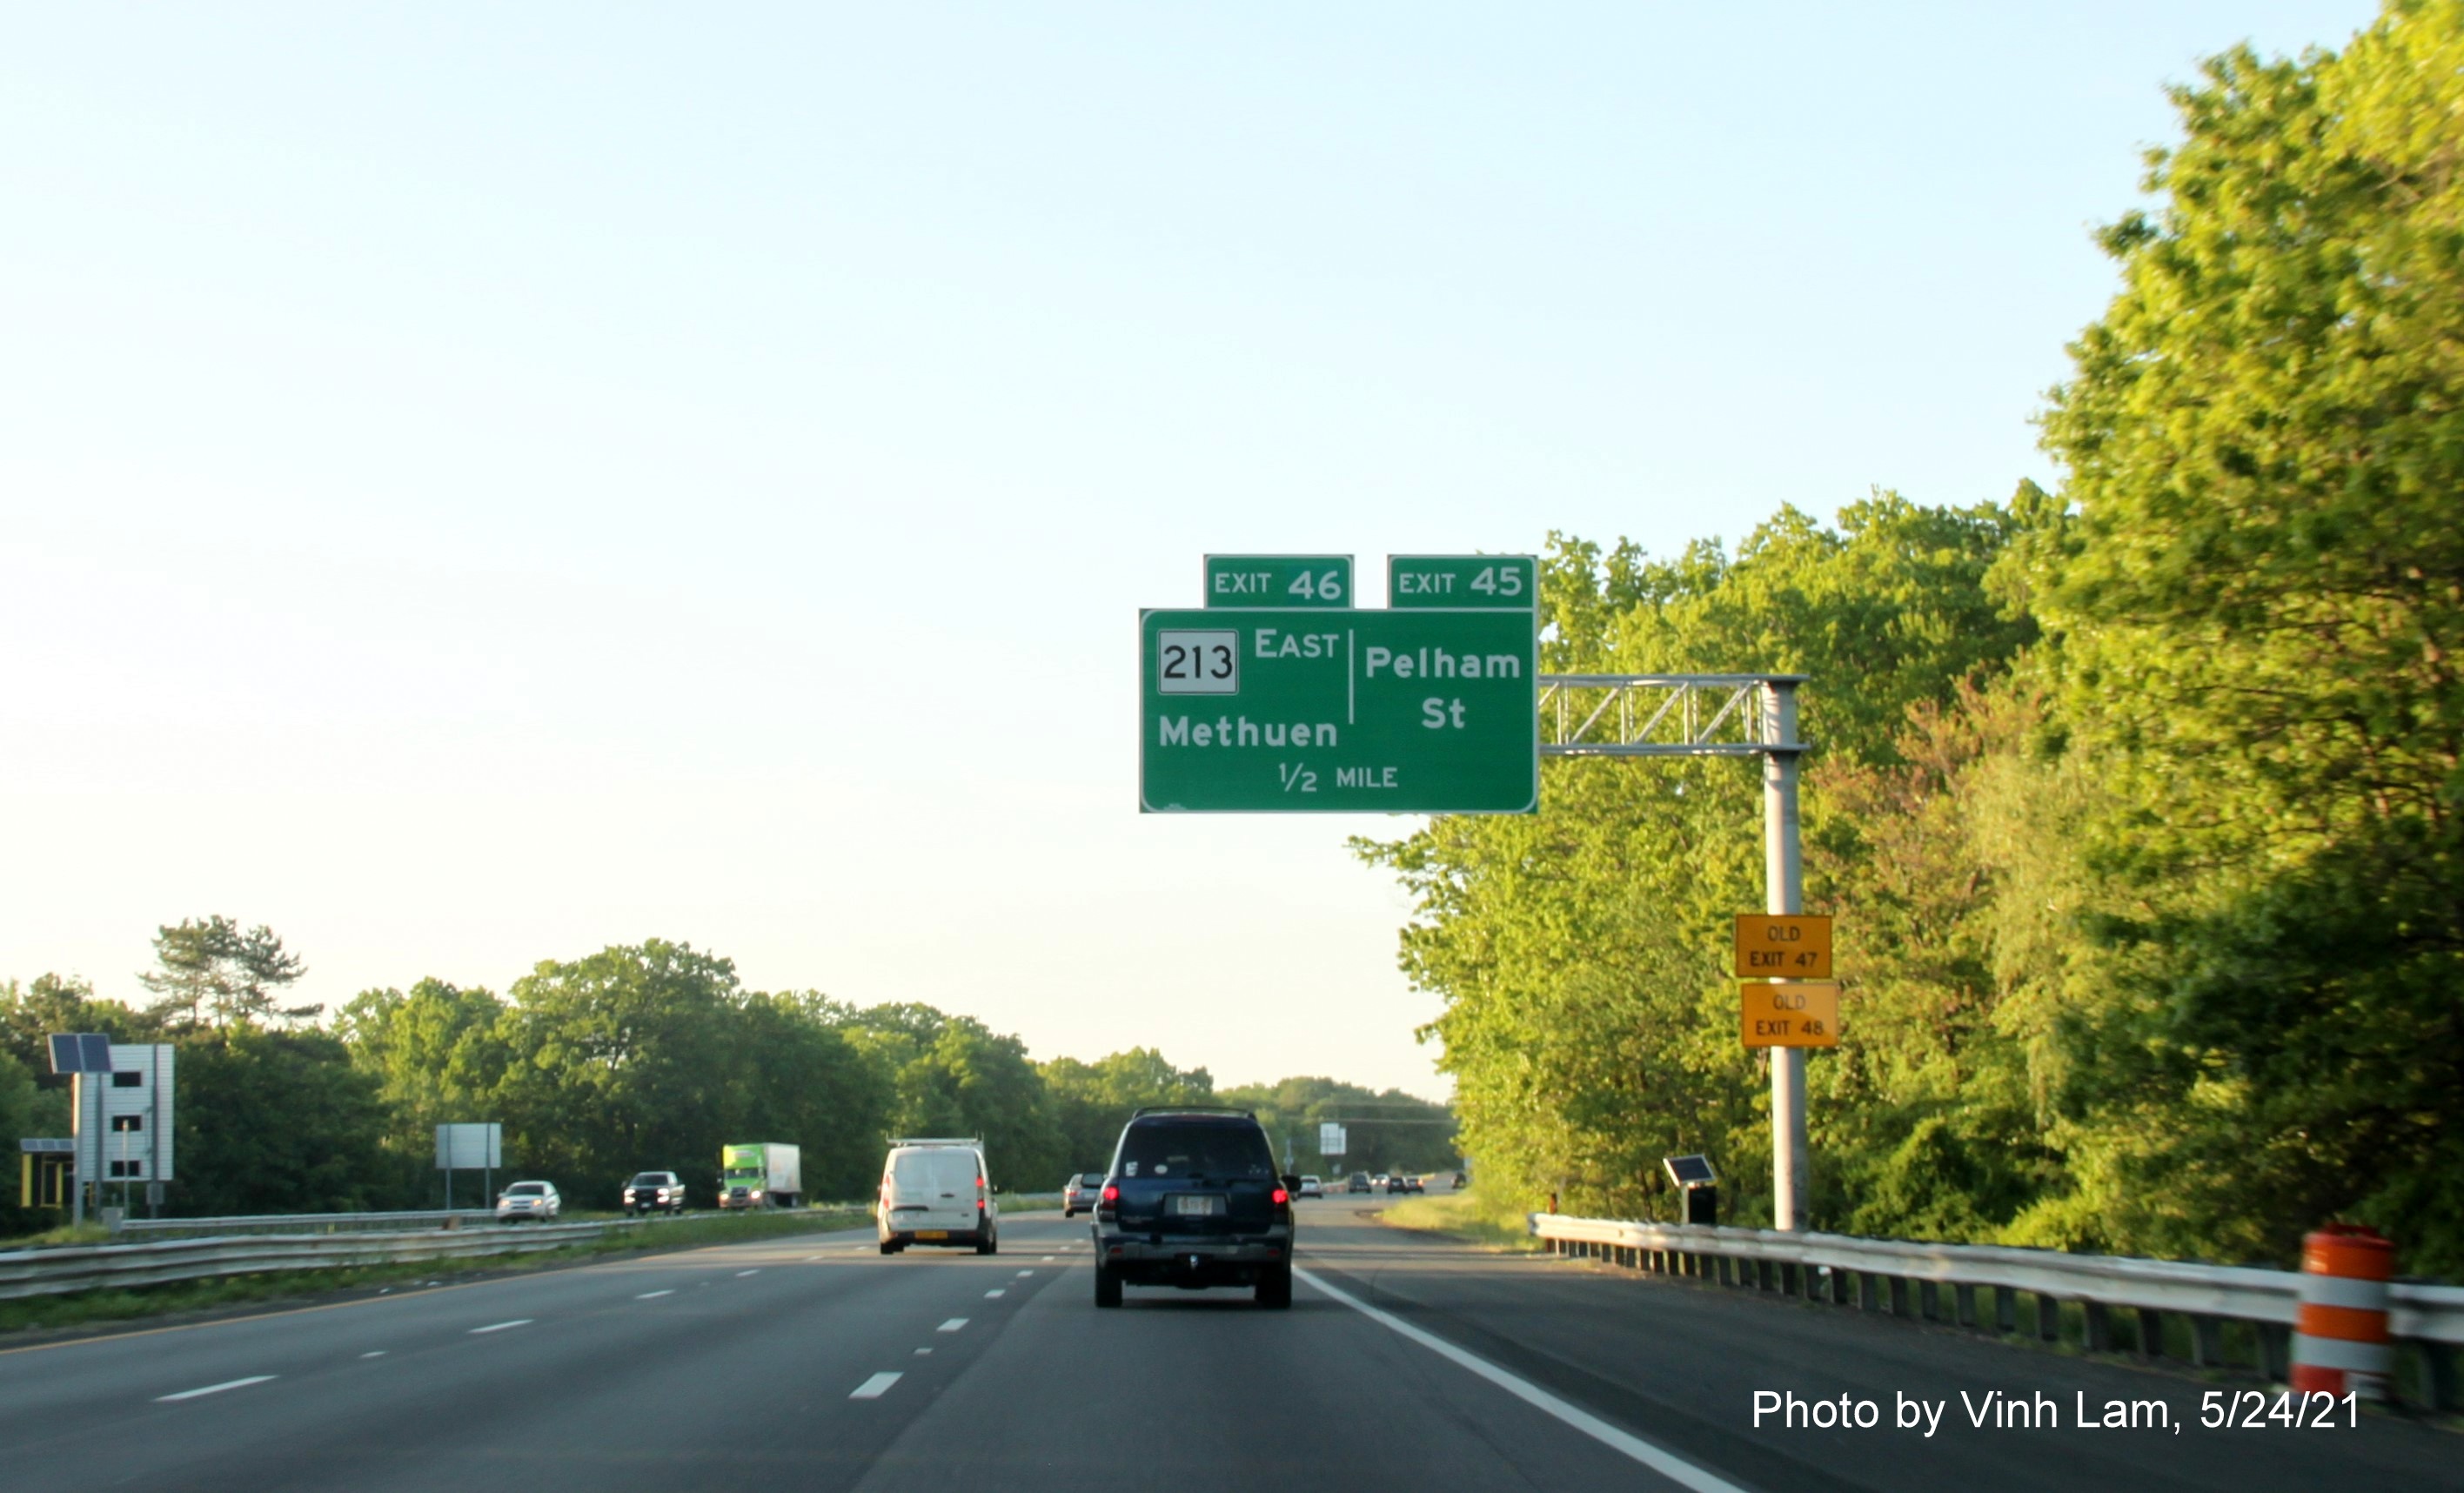 Image of 1/2 mile advance overhead sign Pelham Road/MA 213 exits with new milepost based exit numbers on I-93 North in Methuen, by Vinh Lam, May 2021